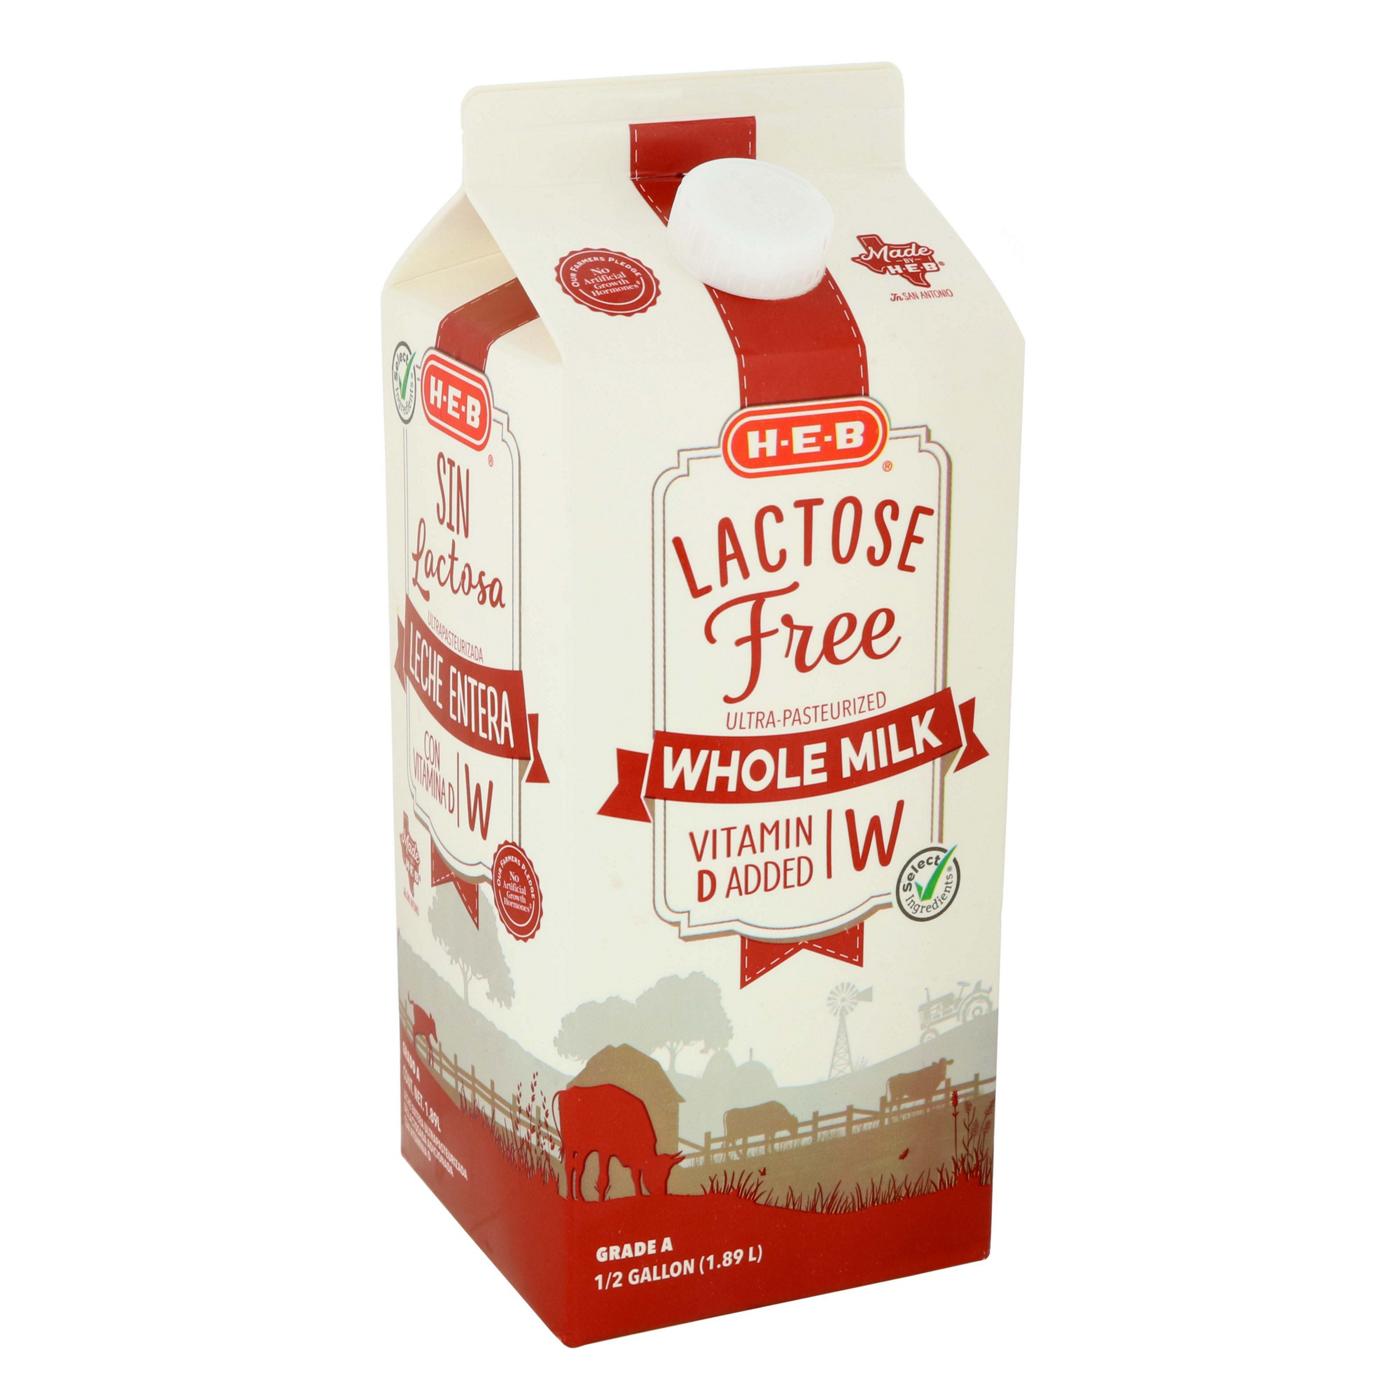 H-E-B Lactose Free Ultra Pasteurized Whole Milk; image 1 of 2